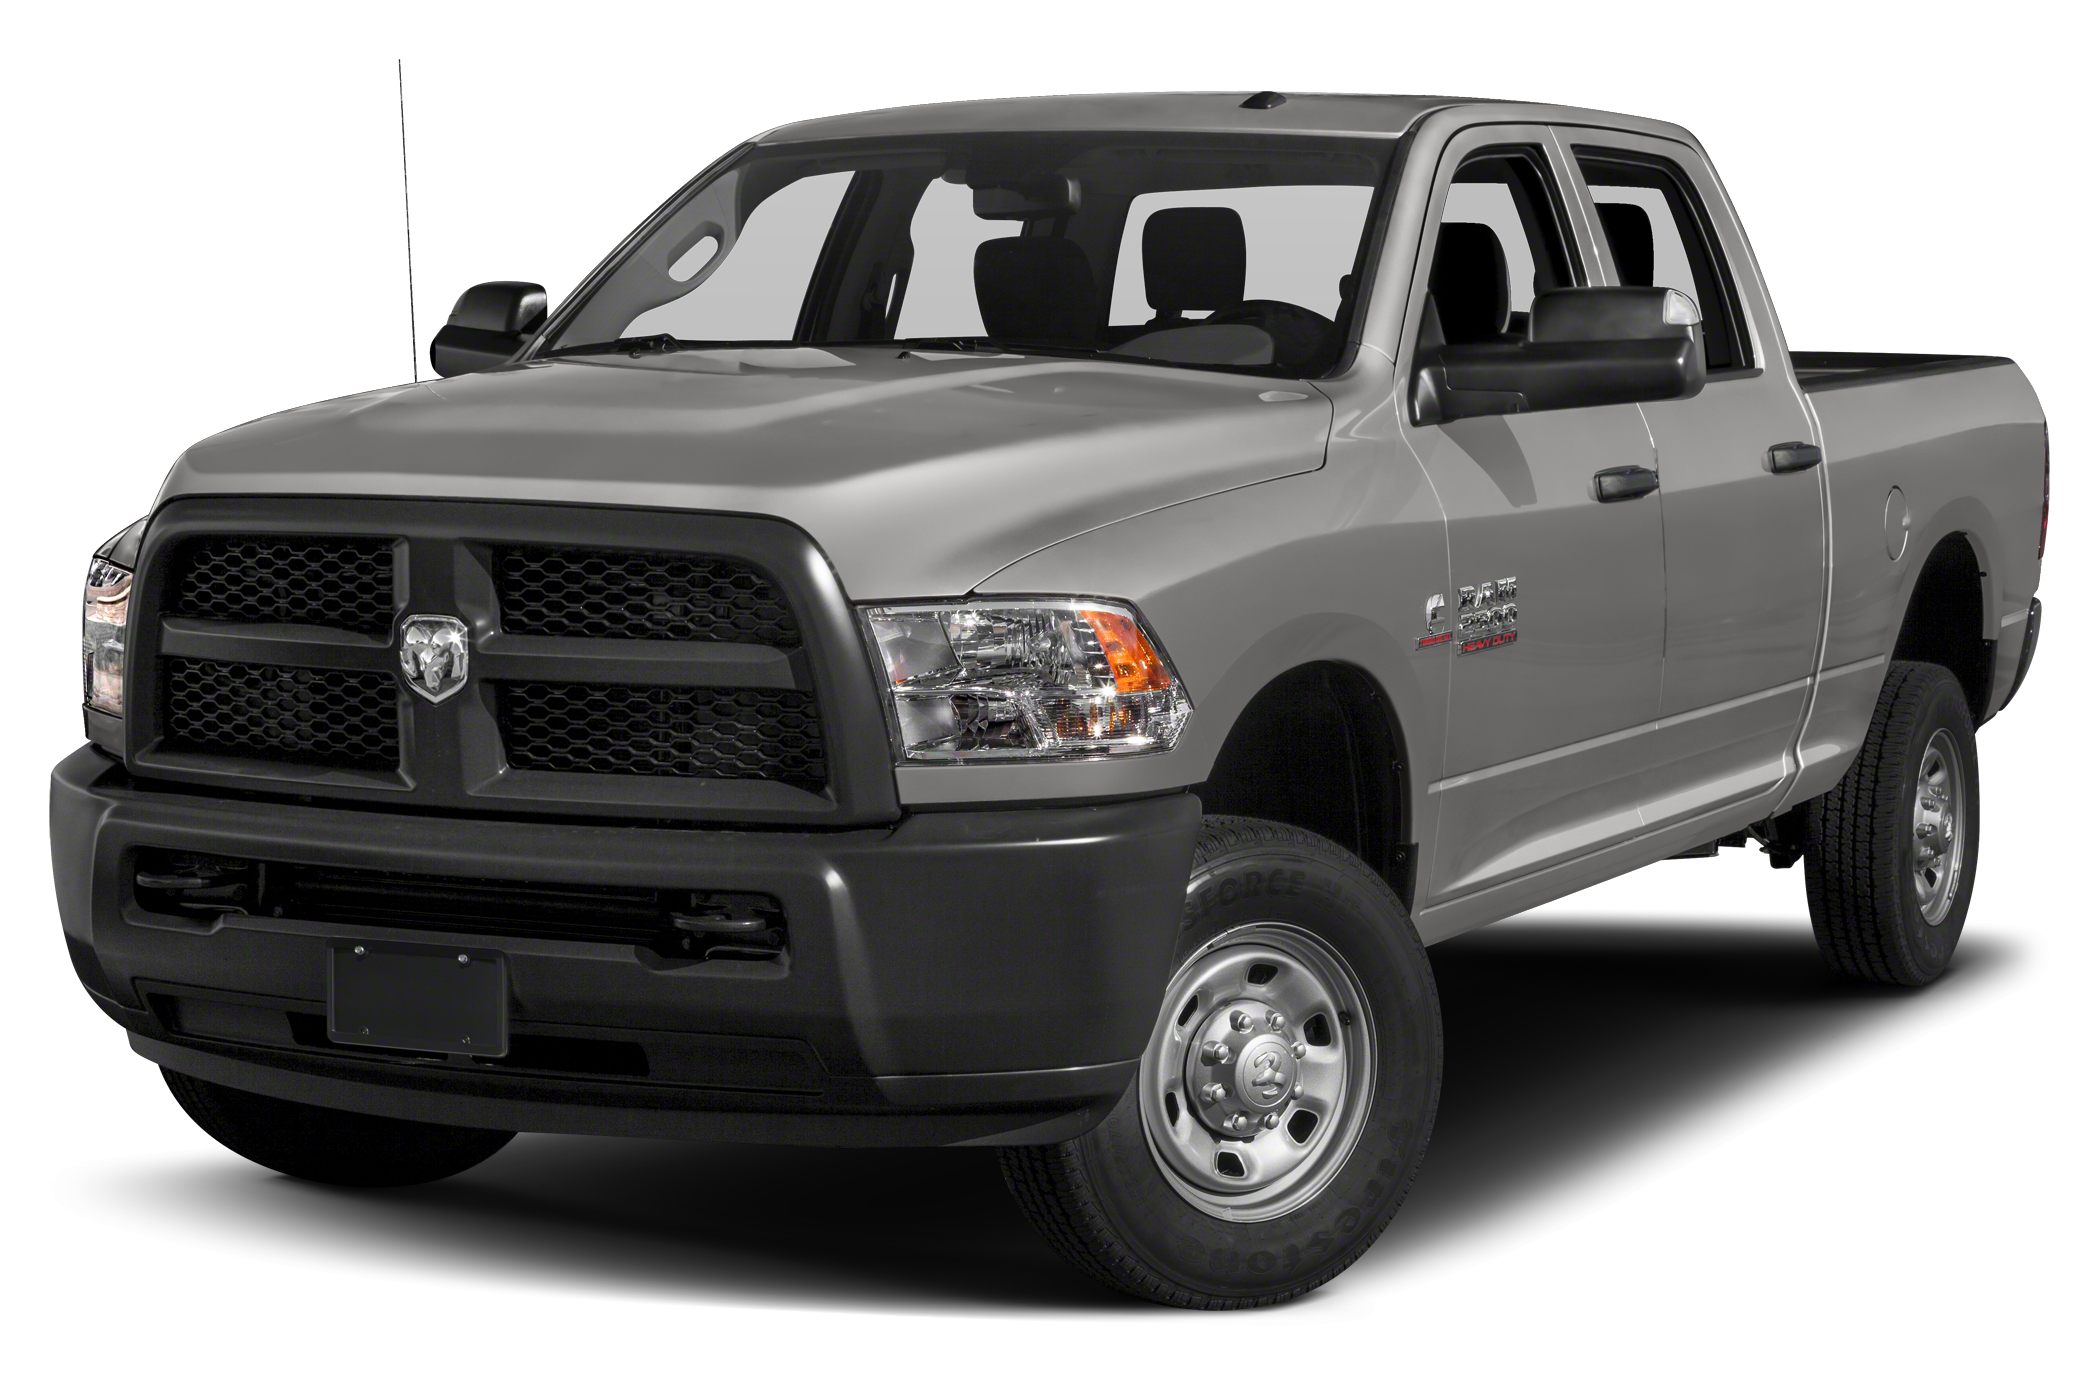 2015 Ram 2500 Tradesman 4x2 Crew Cab 169 In Wb Pictures